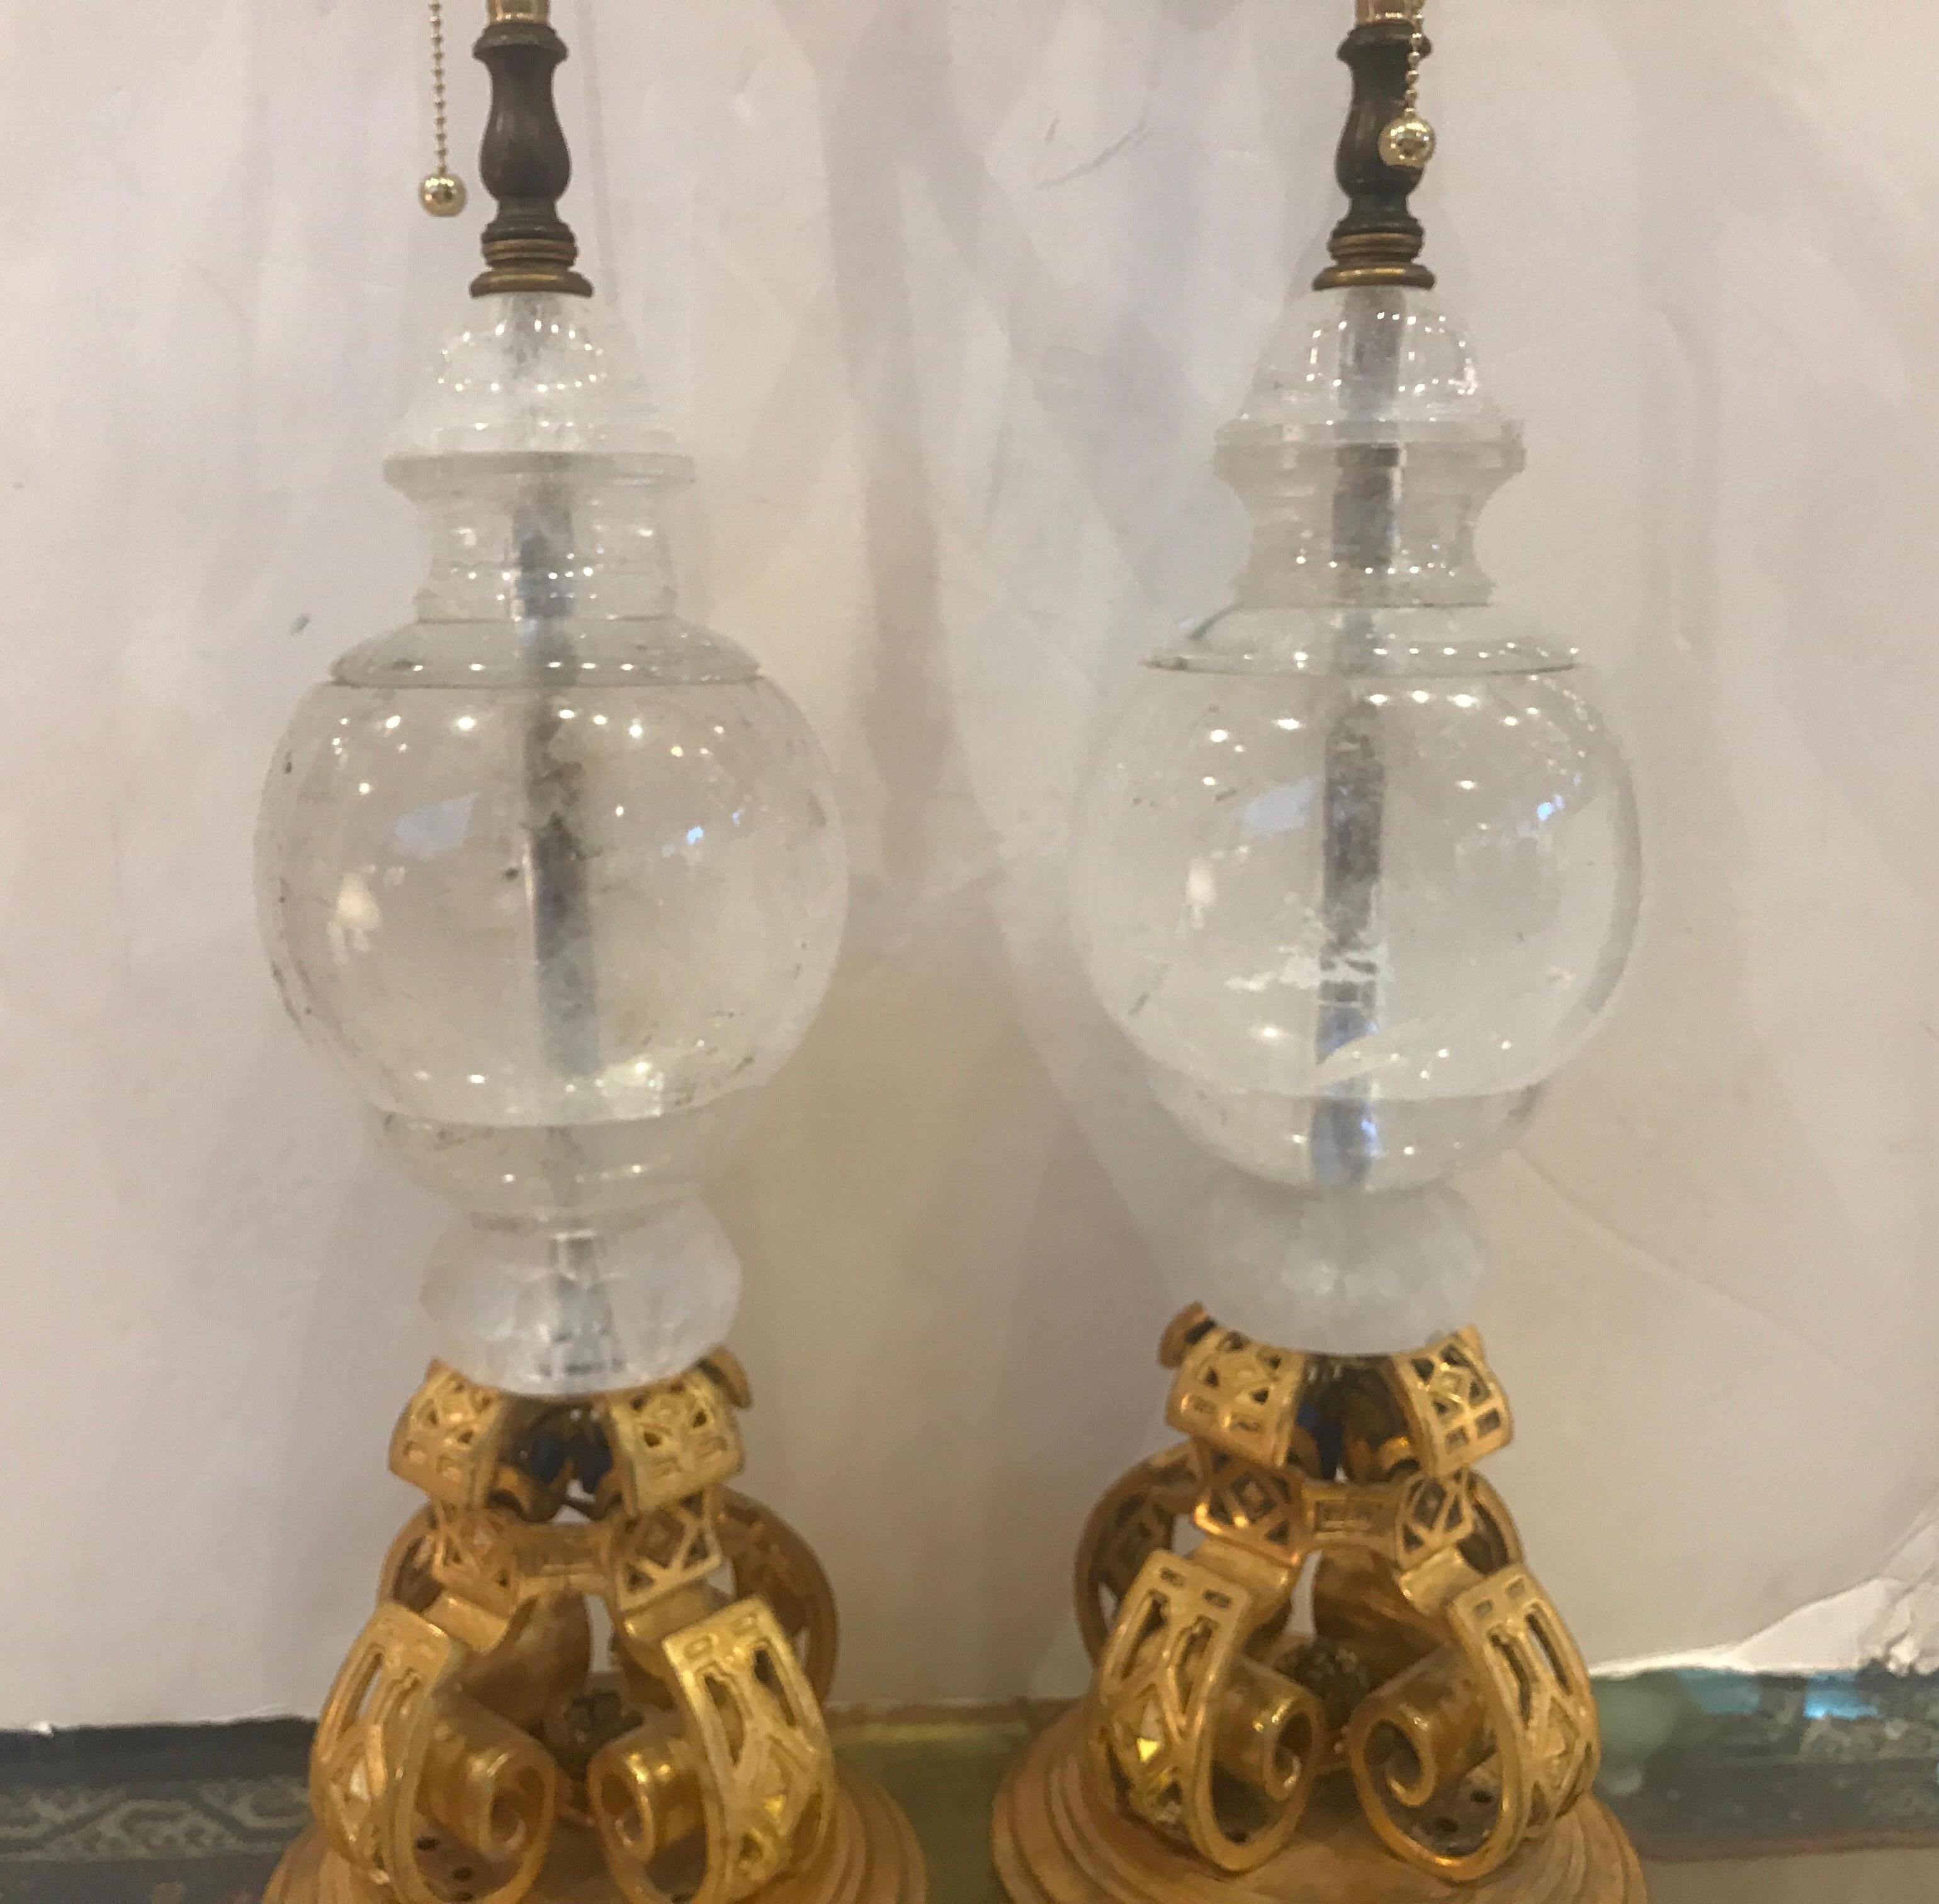 An opulent pair of large rock crystal and gilt bronze lamps. The large solid rock crystal urn with cast gilt bronze bases. The lamps with two light sockets with on/off switch at base. The crystal with some carbon flecks that naturally occur in real